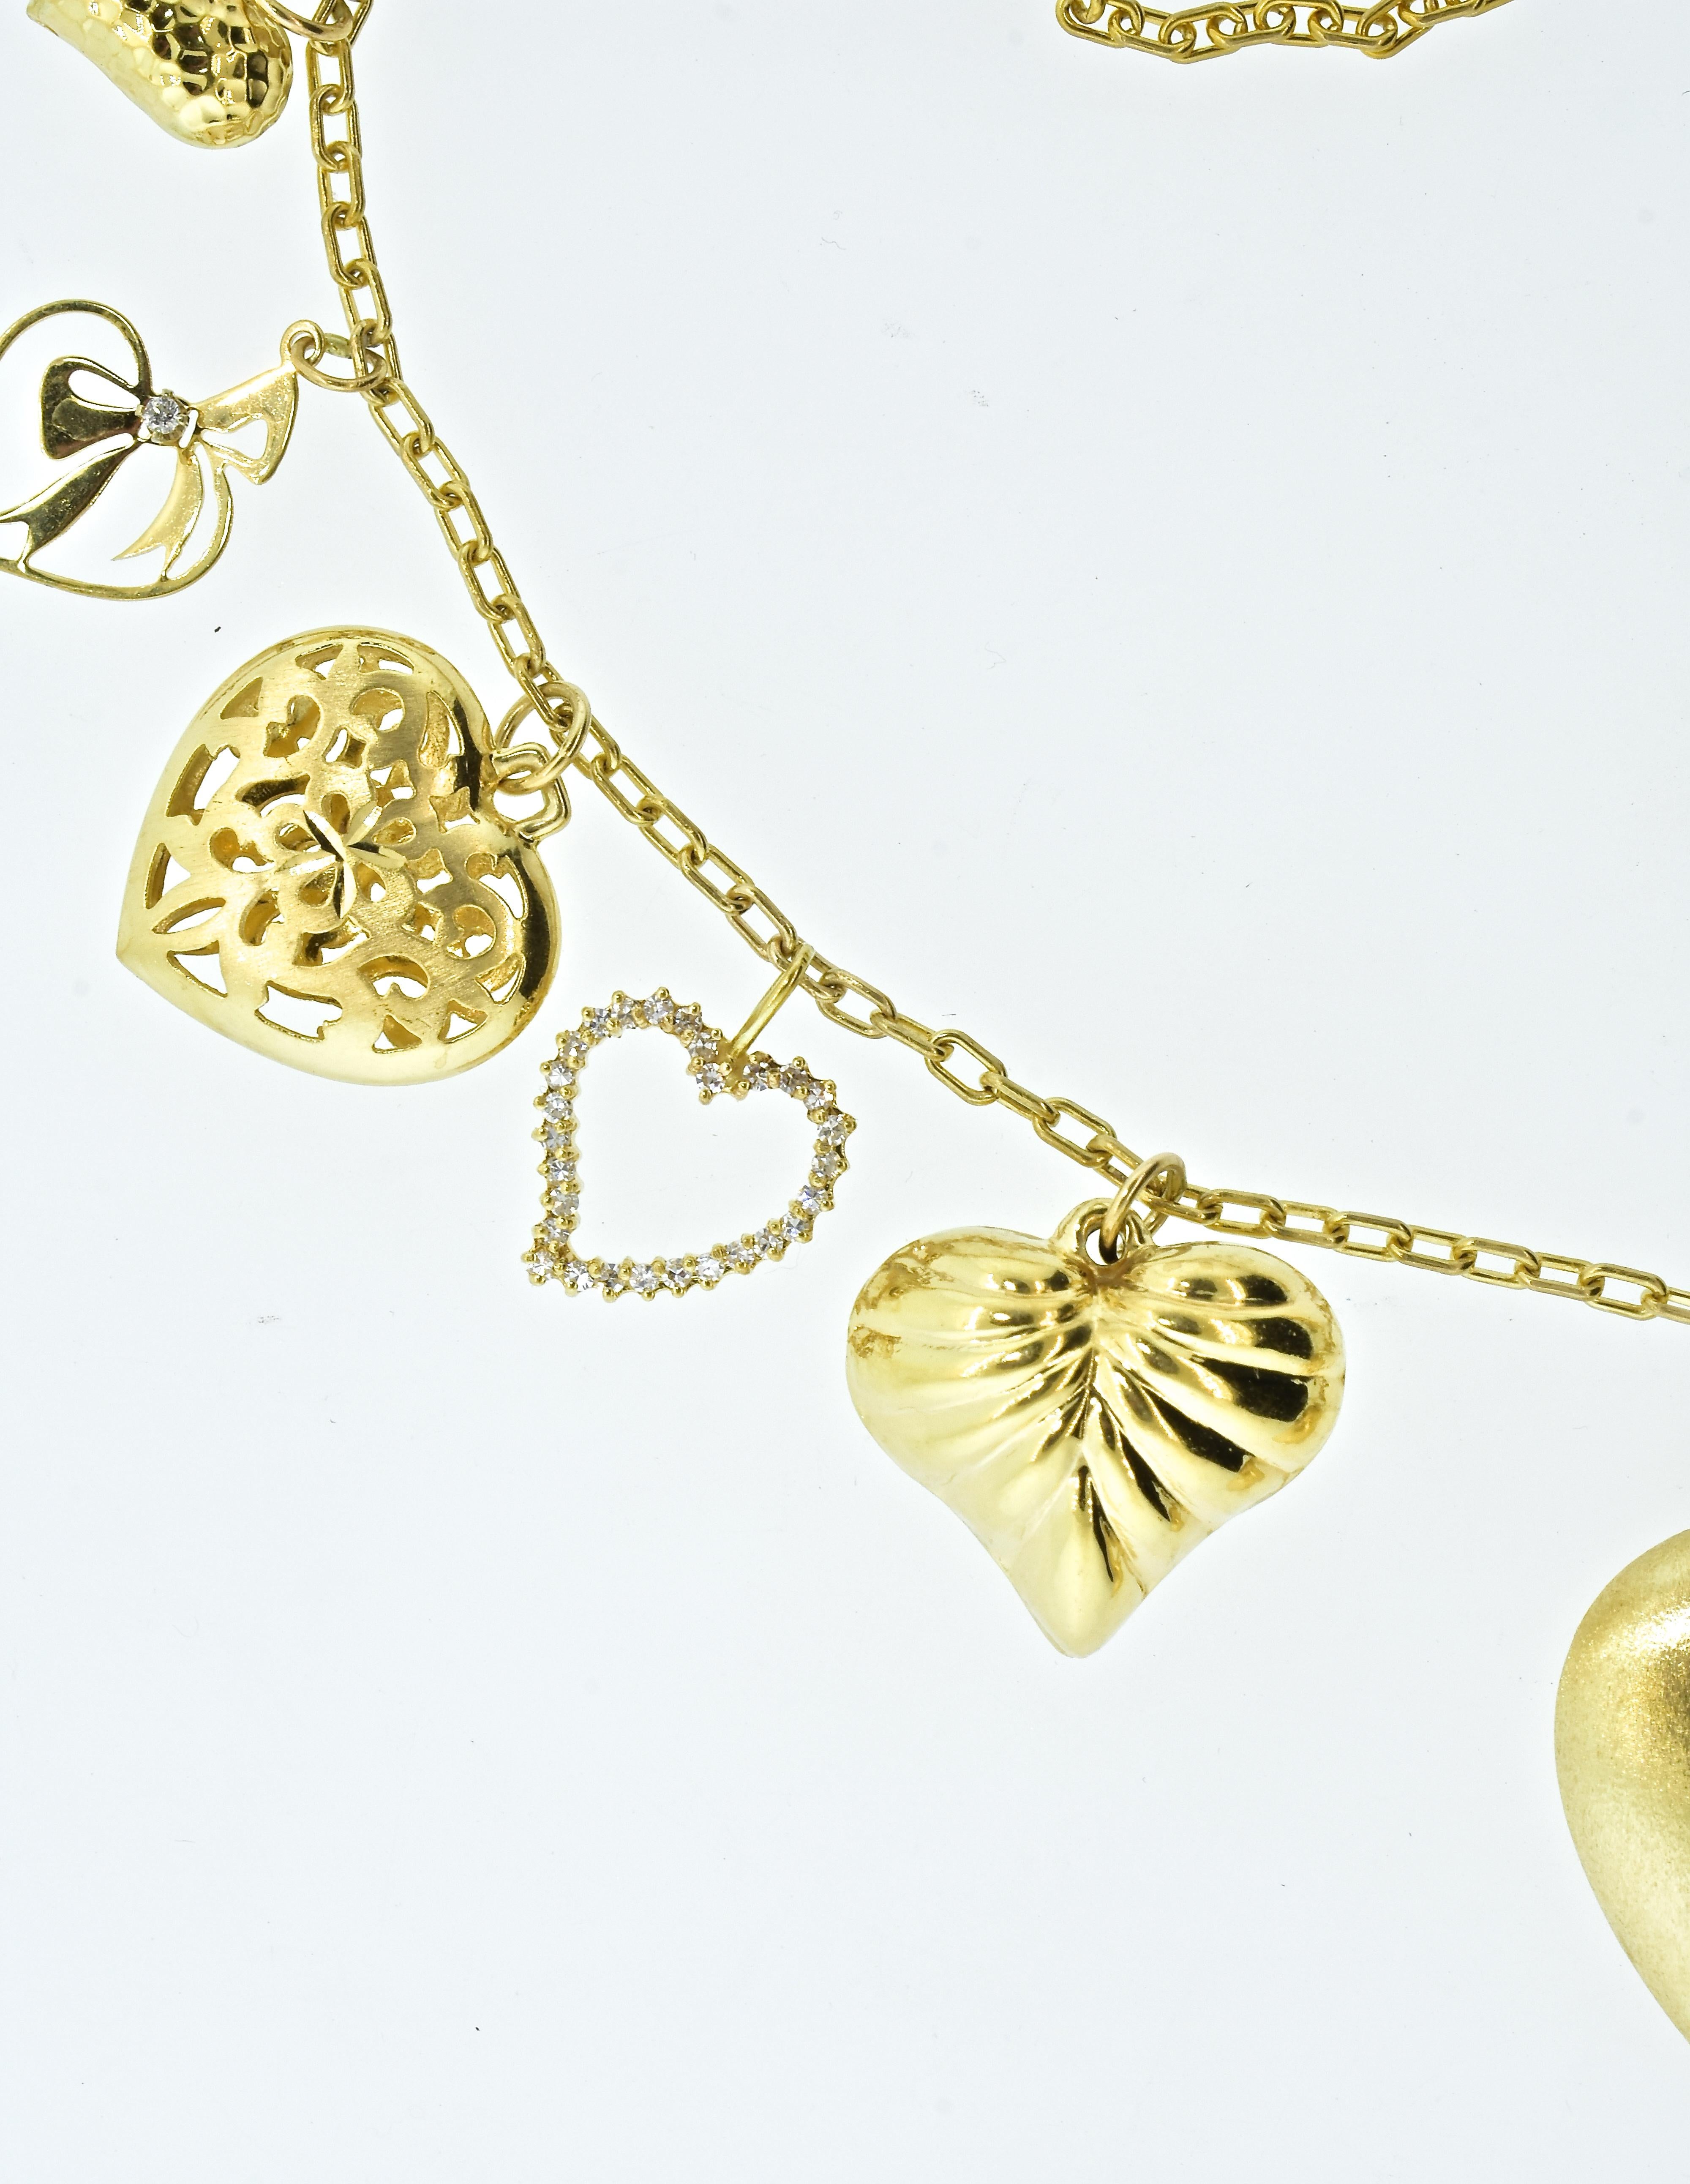 Heart pendants hang from a gold chain necklace, which is 23 inches long.  There are .70 cts of fine white diamonds set in 5 of the heart pendants.  One of the pendants is also a locket.  This necklace, with 11 different hearts, weighs 29 grams, it